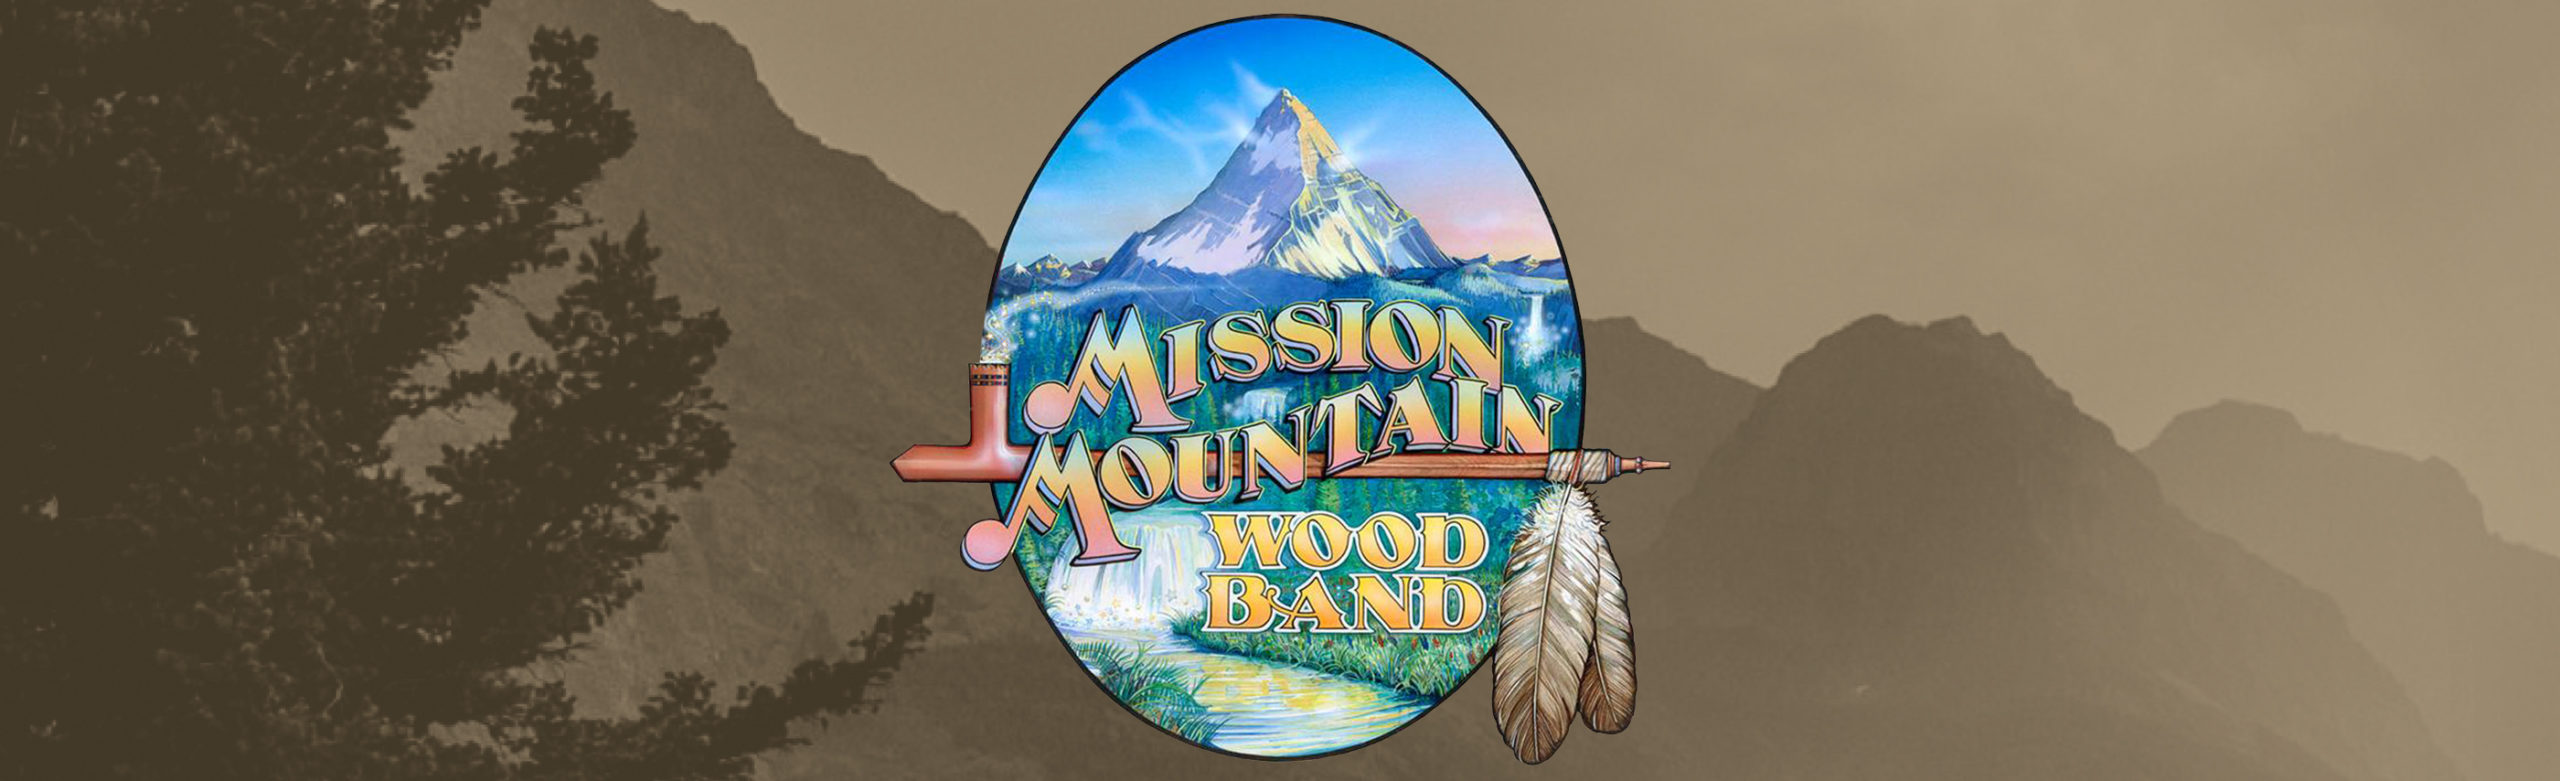 Event Info: Mission Mountain Wood Band at The Wilma Image